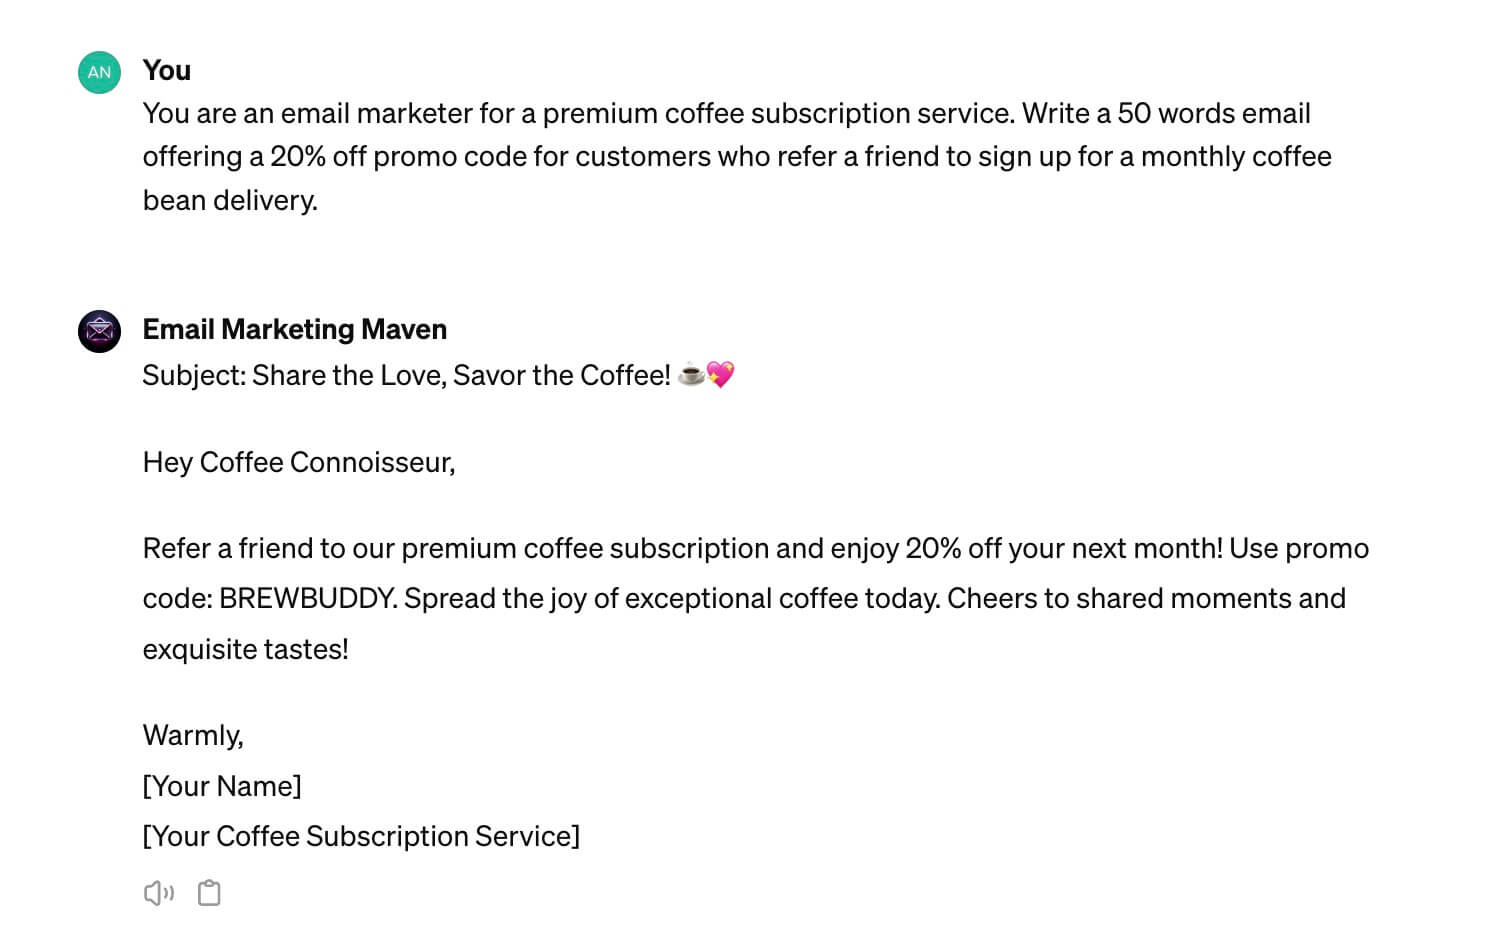 Example of an email prompt to offer a 20% off promo code for referring friends to a premium coffee subscription